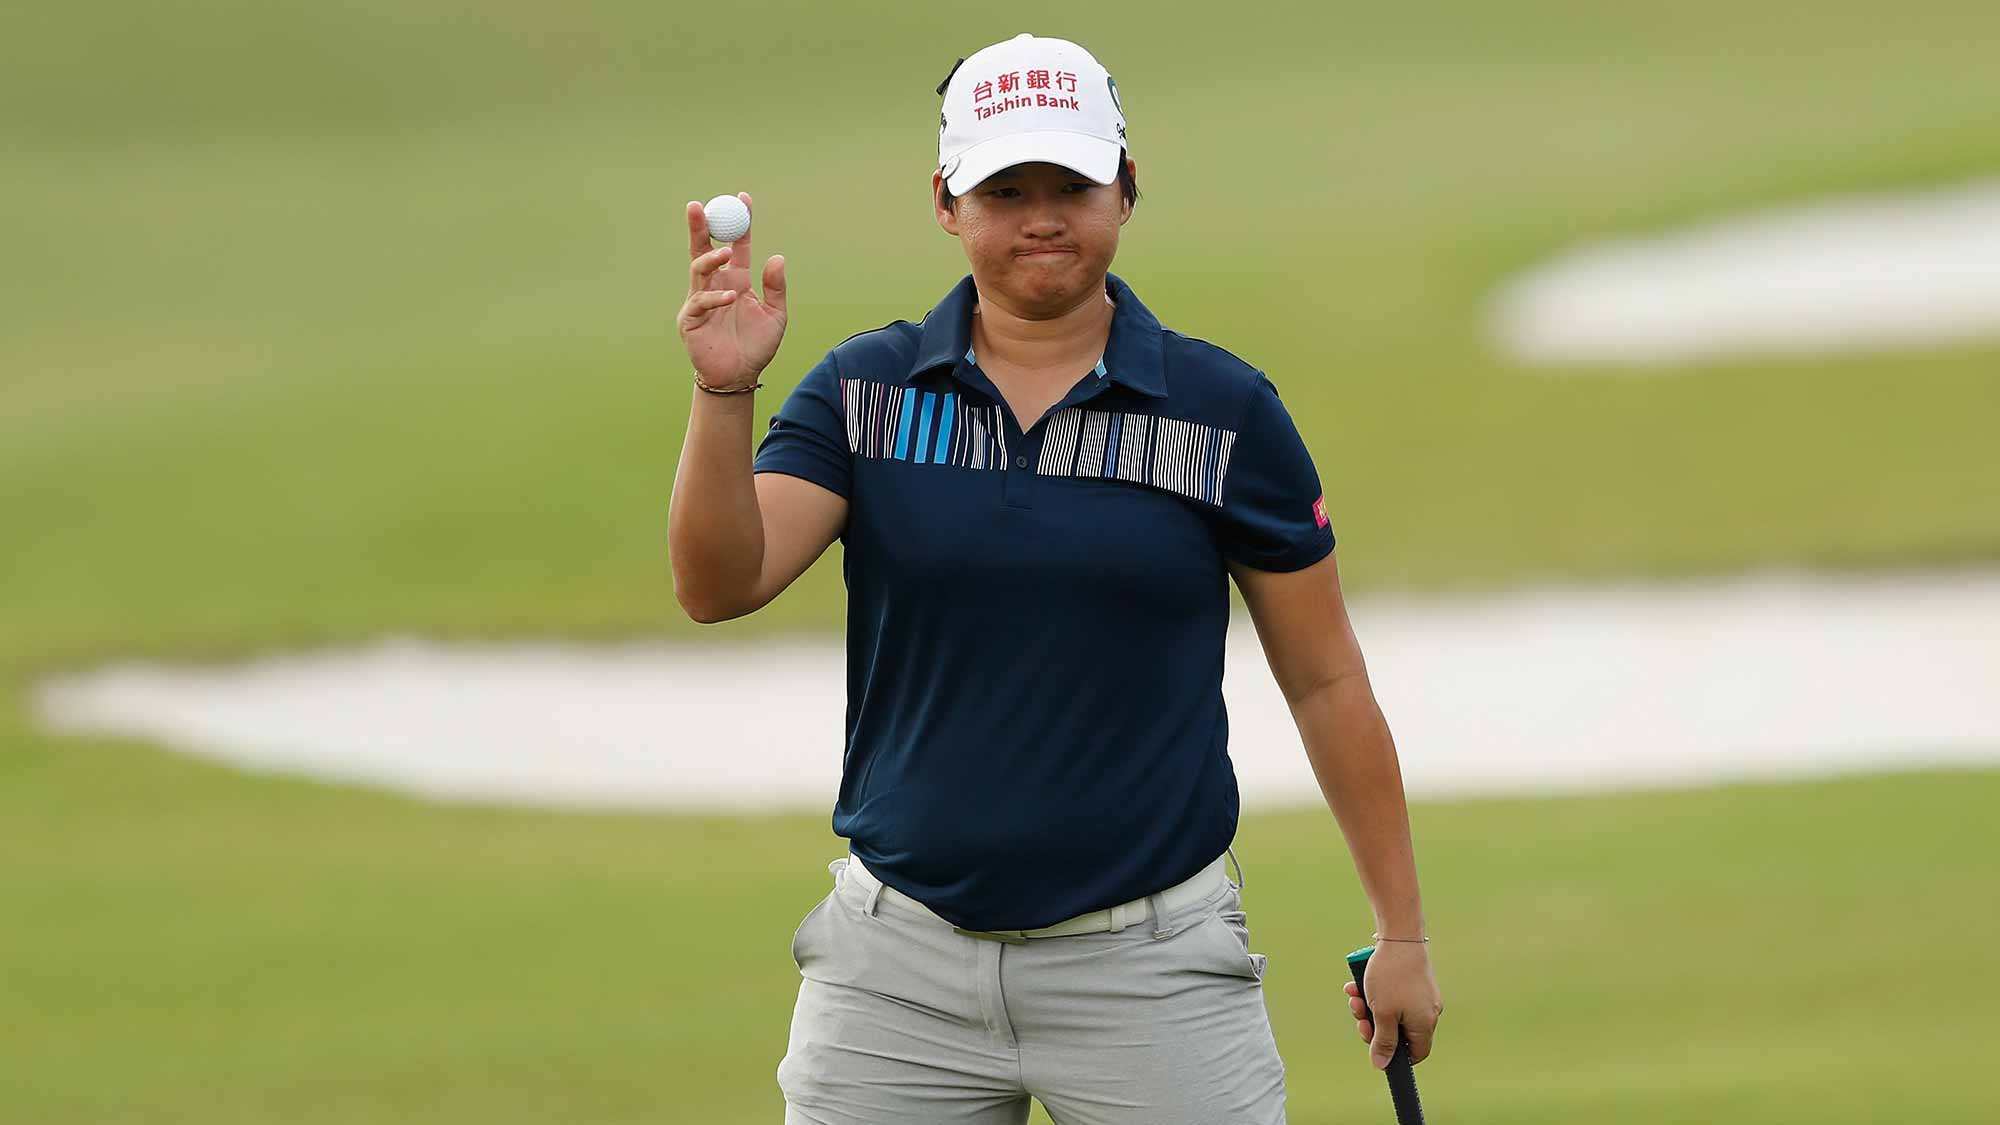 Yani Tseng of Chinese Taipei reacts at the fifteen hole during the first round of the Swinging Skirts LPGA Taiwan Championship at Ta Shee Golf & Country Club on October 25, 2018 in Taoyuan, Chinese Taipei